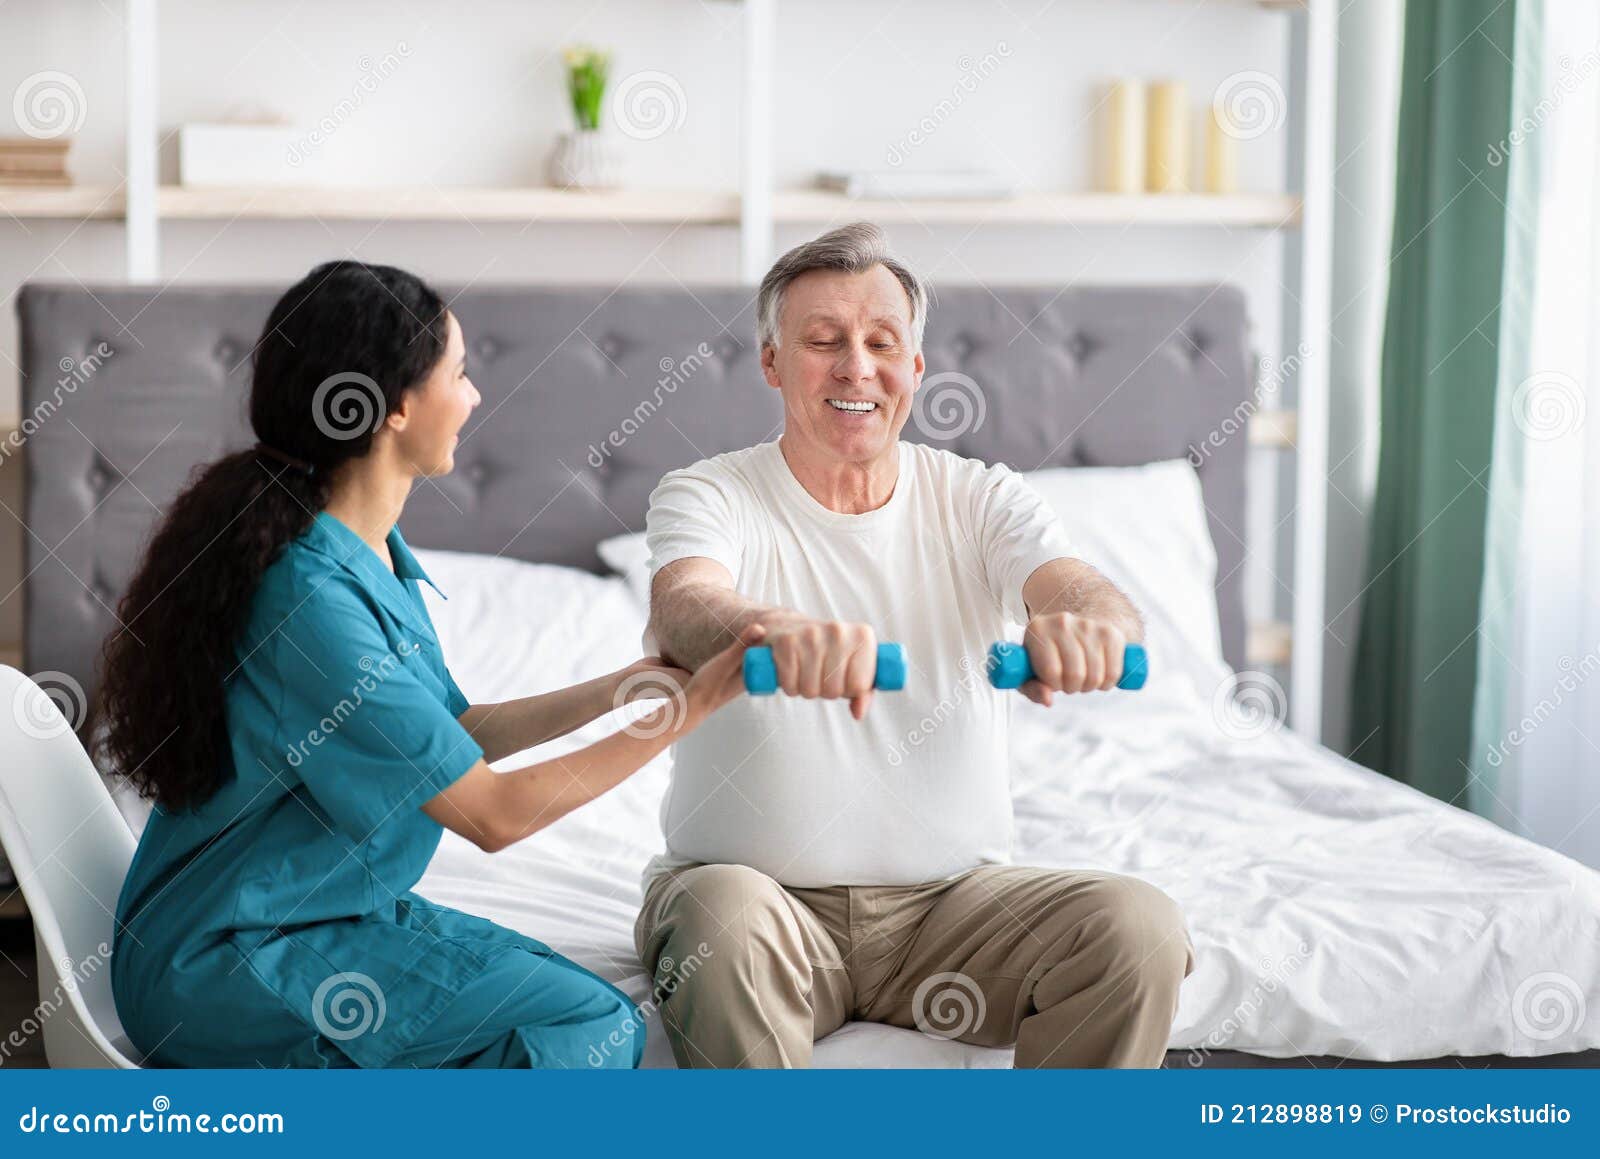 young physiotherapist helping homebound elderly man to do physical exercises with dumbbells on bed at home